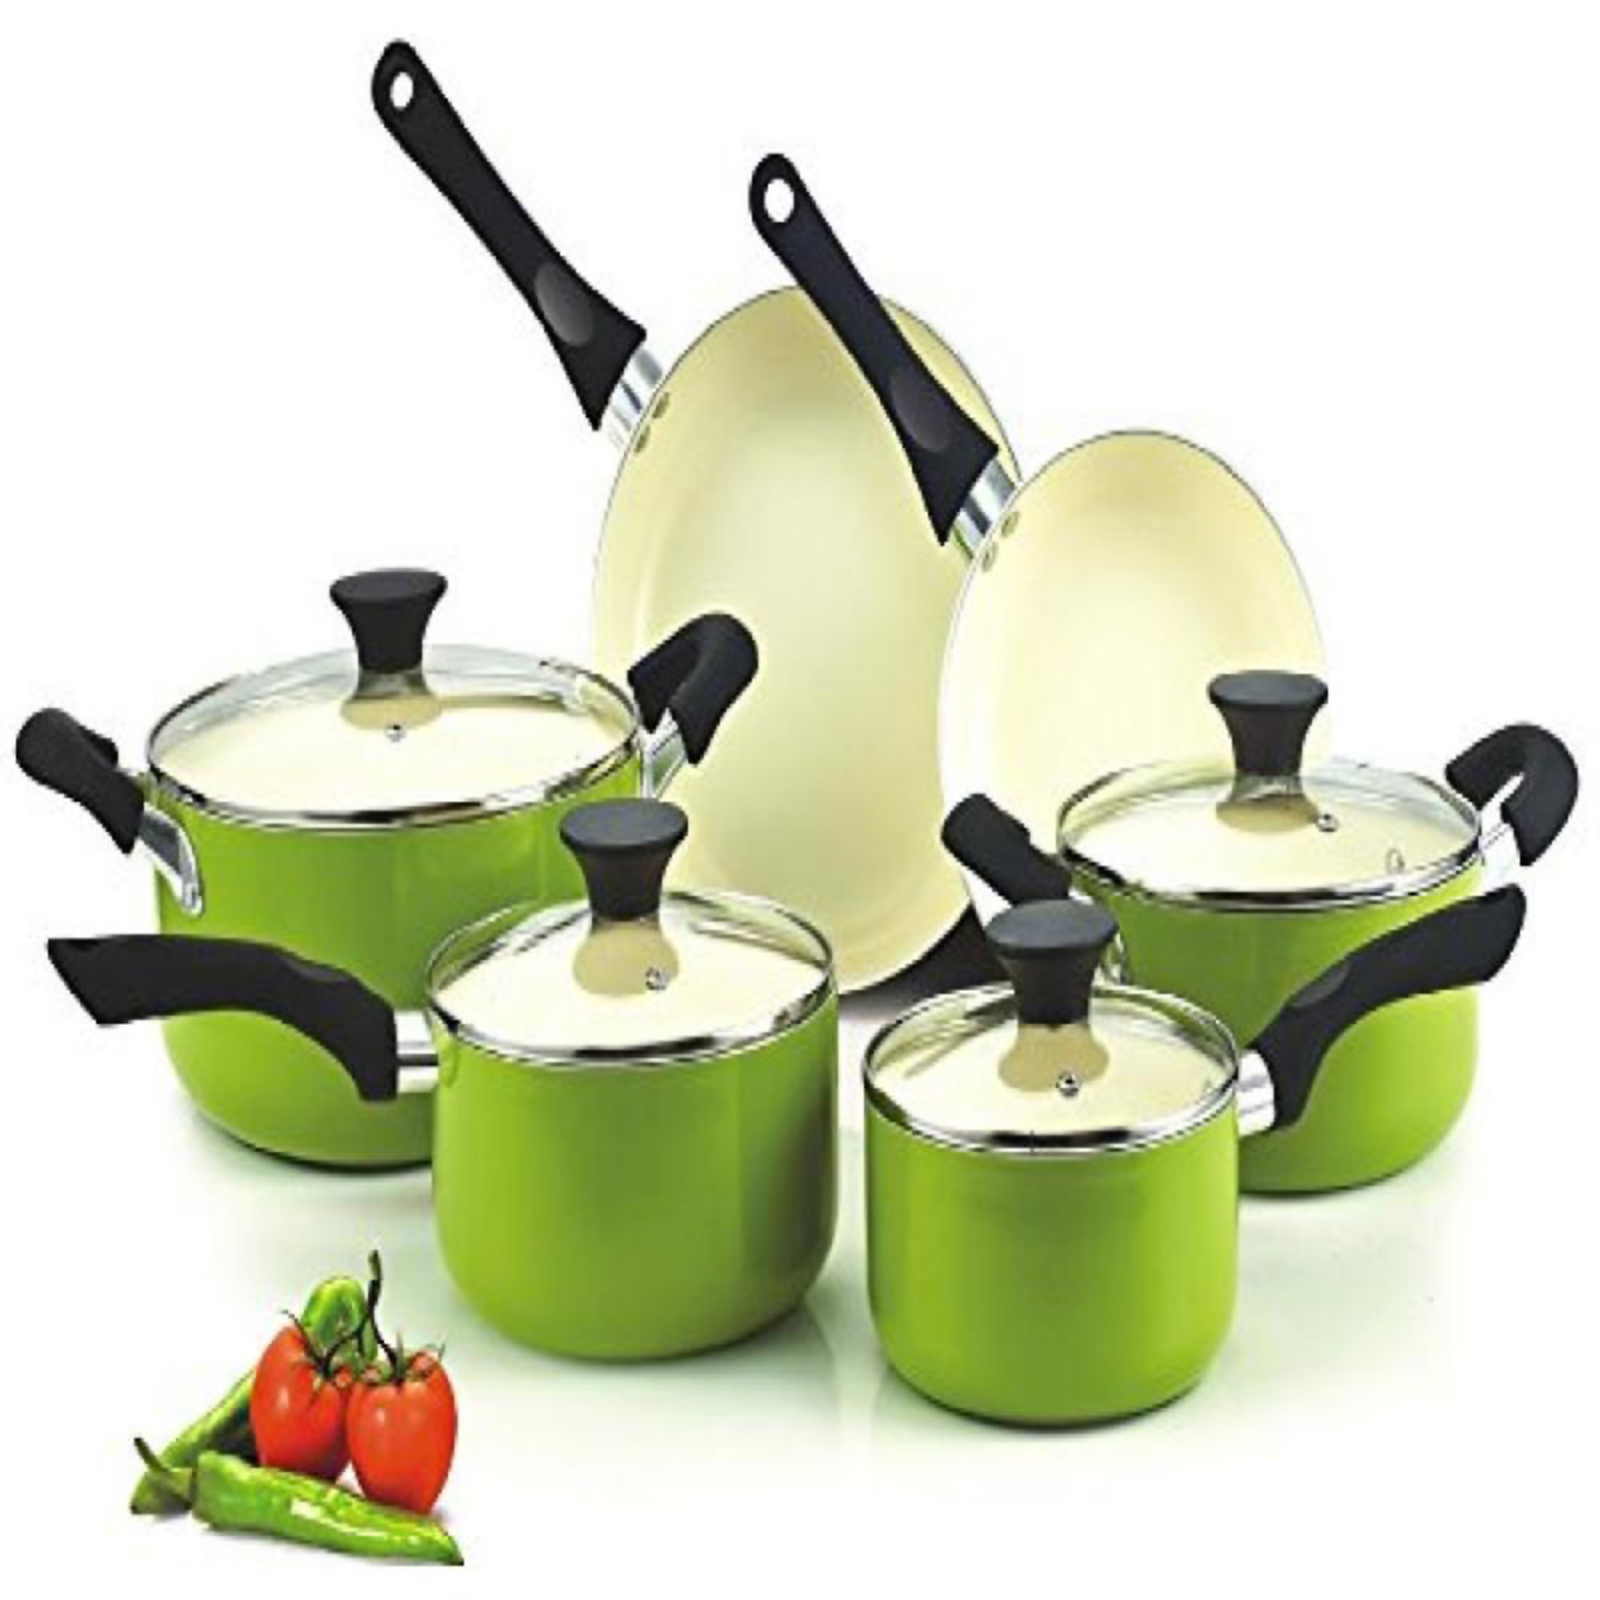  Cook N Home Pots and Pans Set Nonstick, 10 Piece